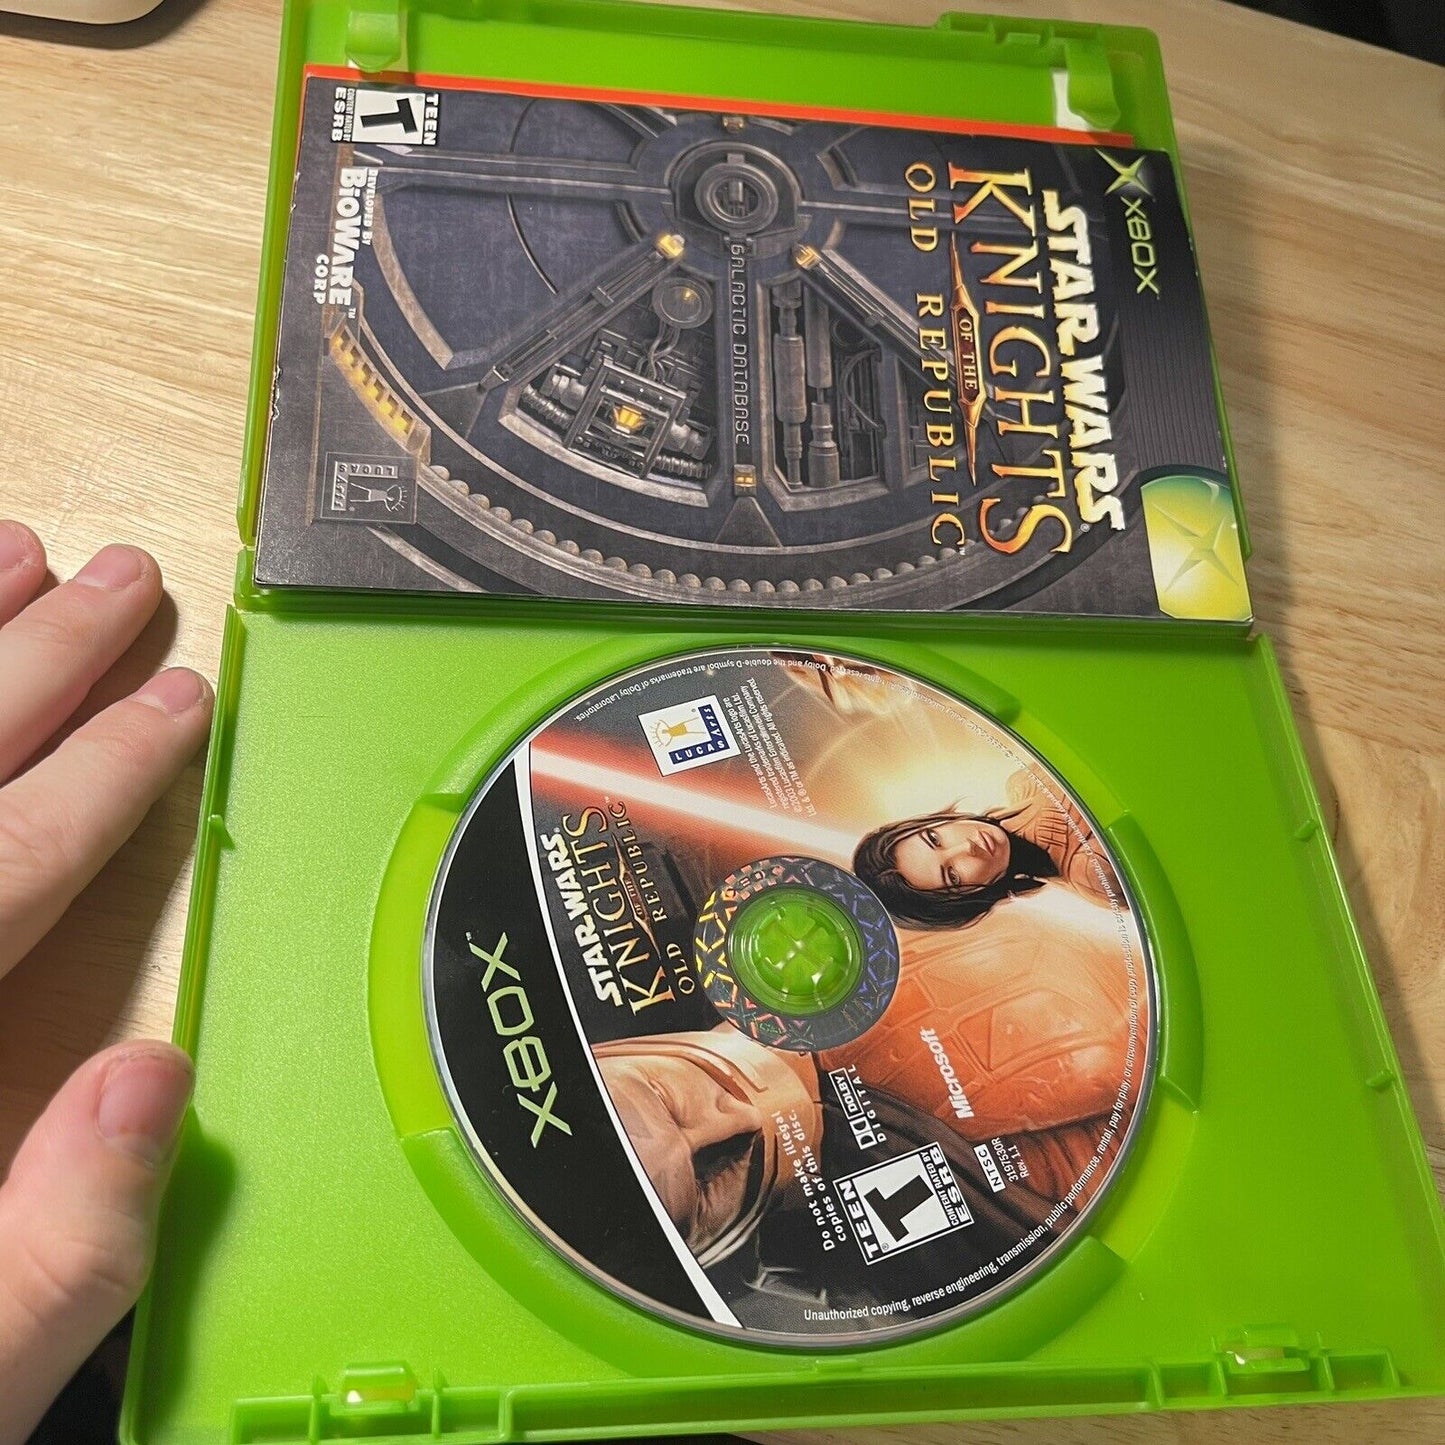 Star Wars: Knights of the Old Republic (Microsoft Xbox, 2003)